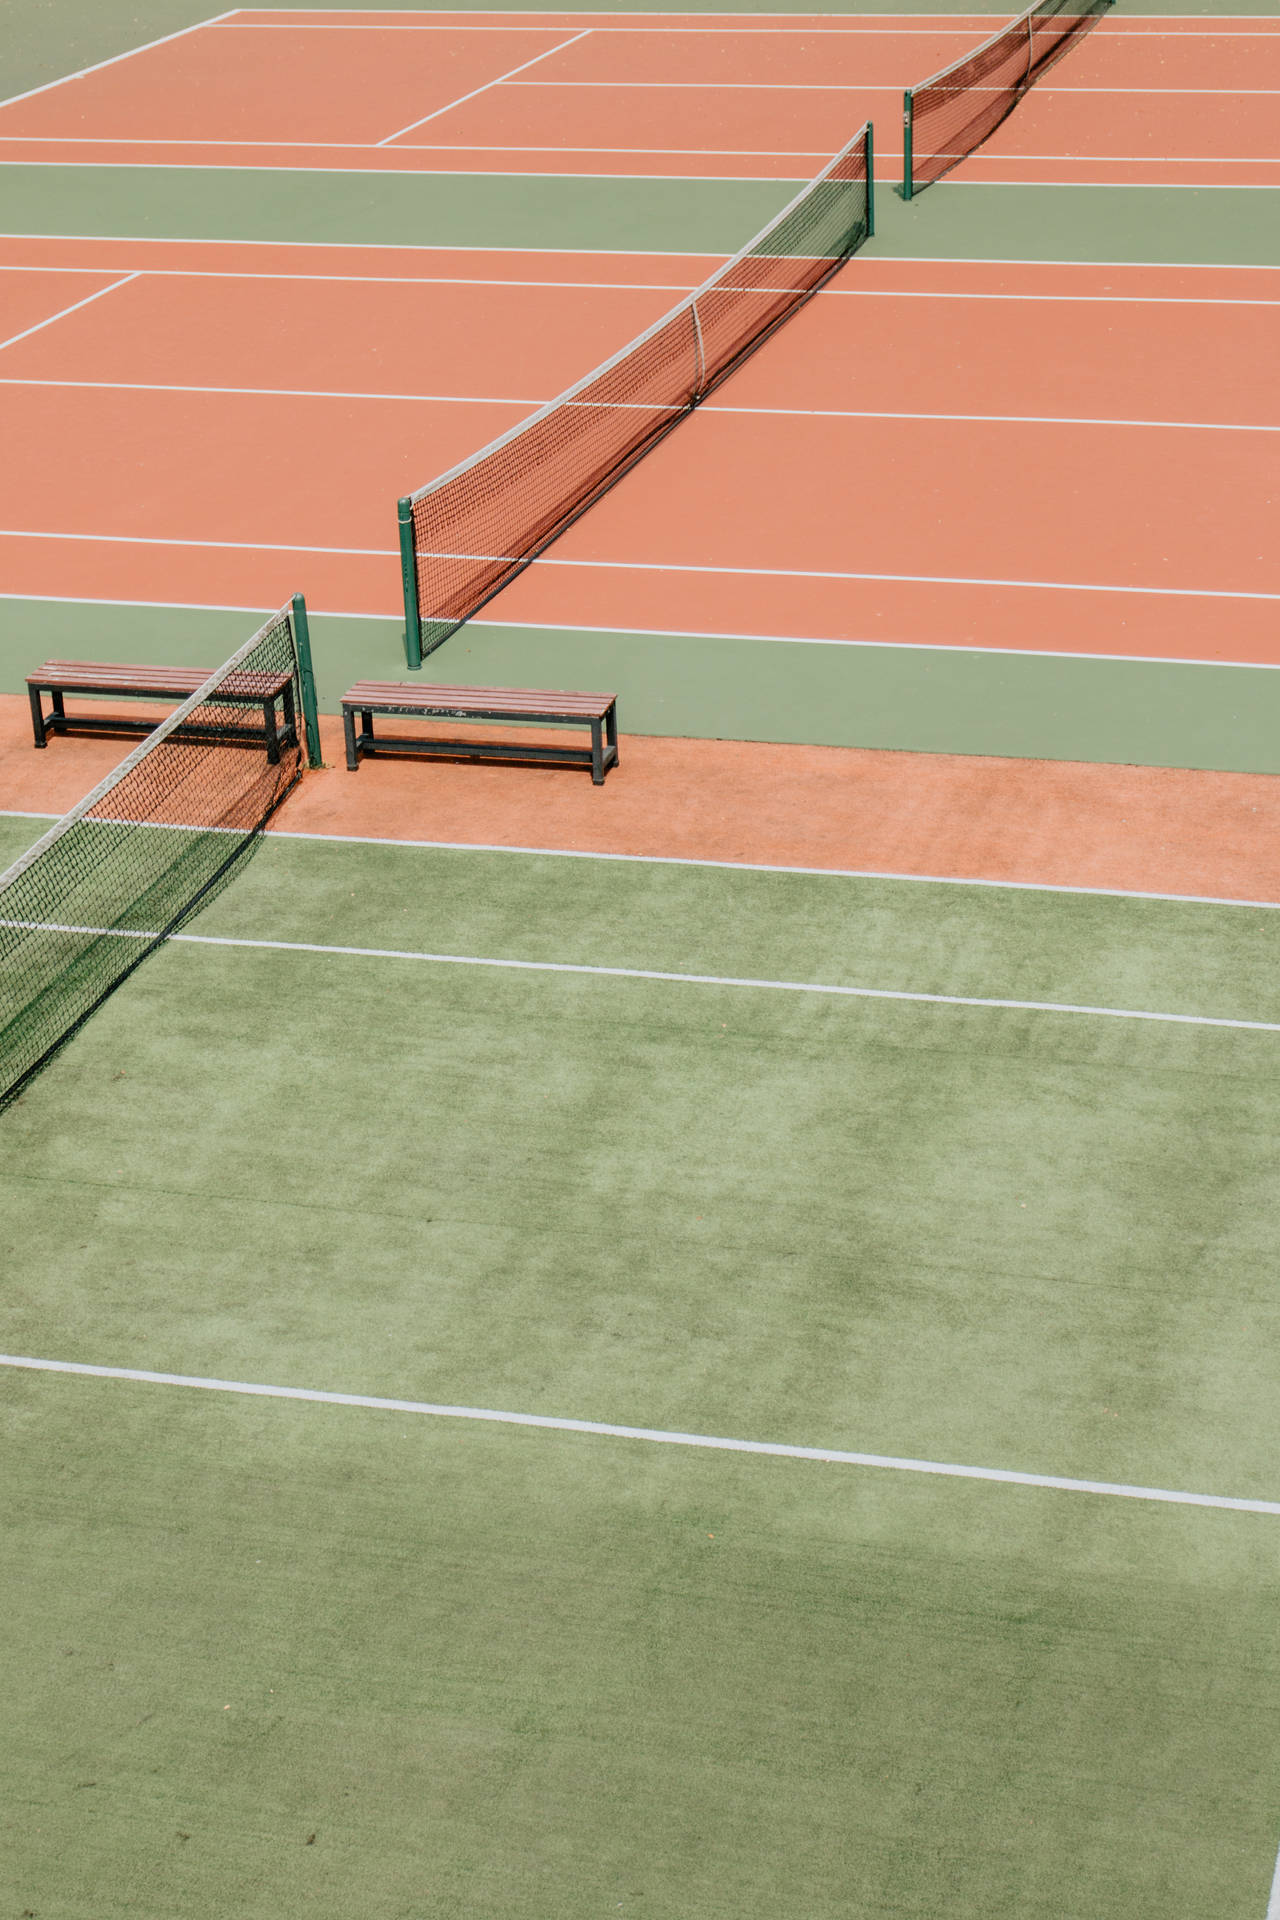 3537X5305 Tennis Wallpaper and Background